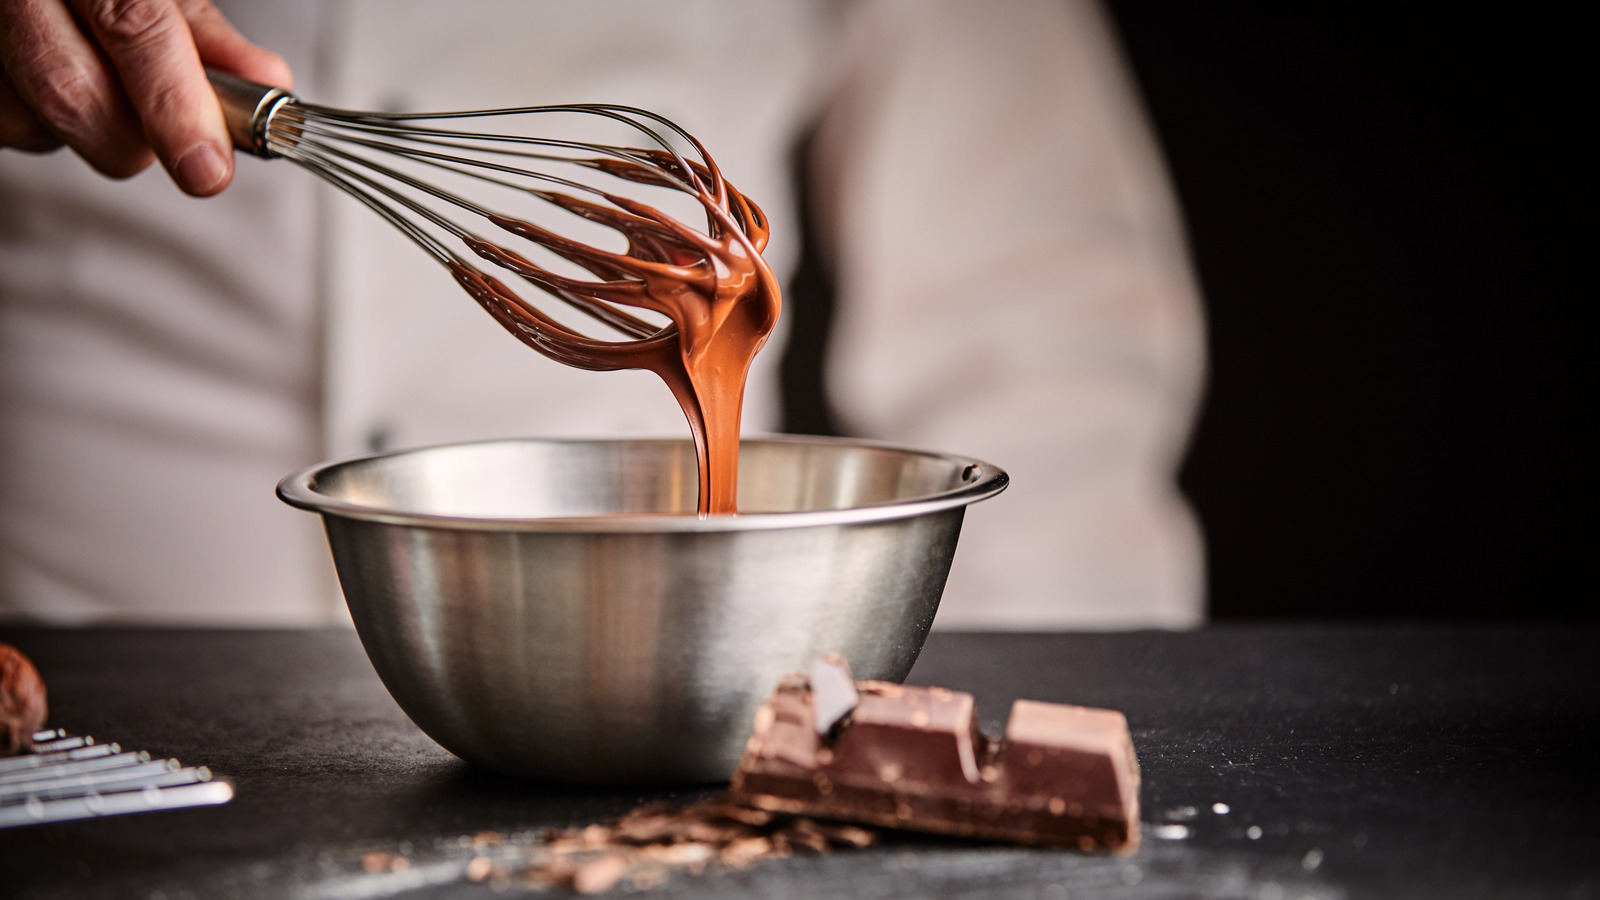 https://www.tastingtable.com/img/gallery/the-absolute-best-uses-for-your-whisk/l-intro-1654004743.jpg